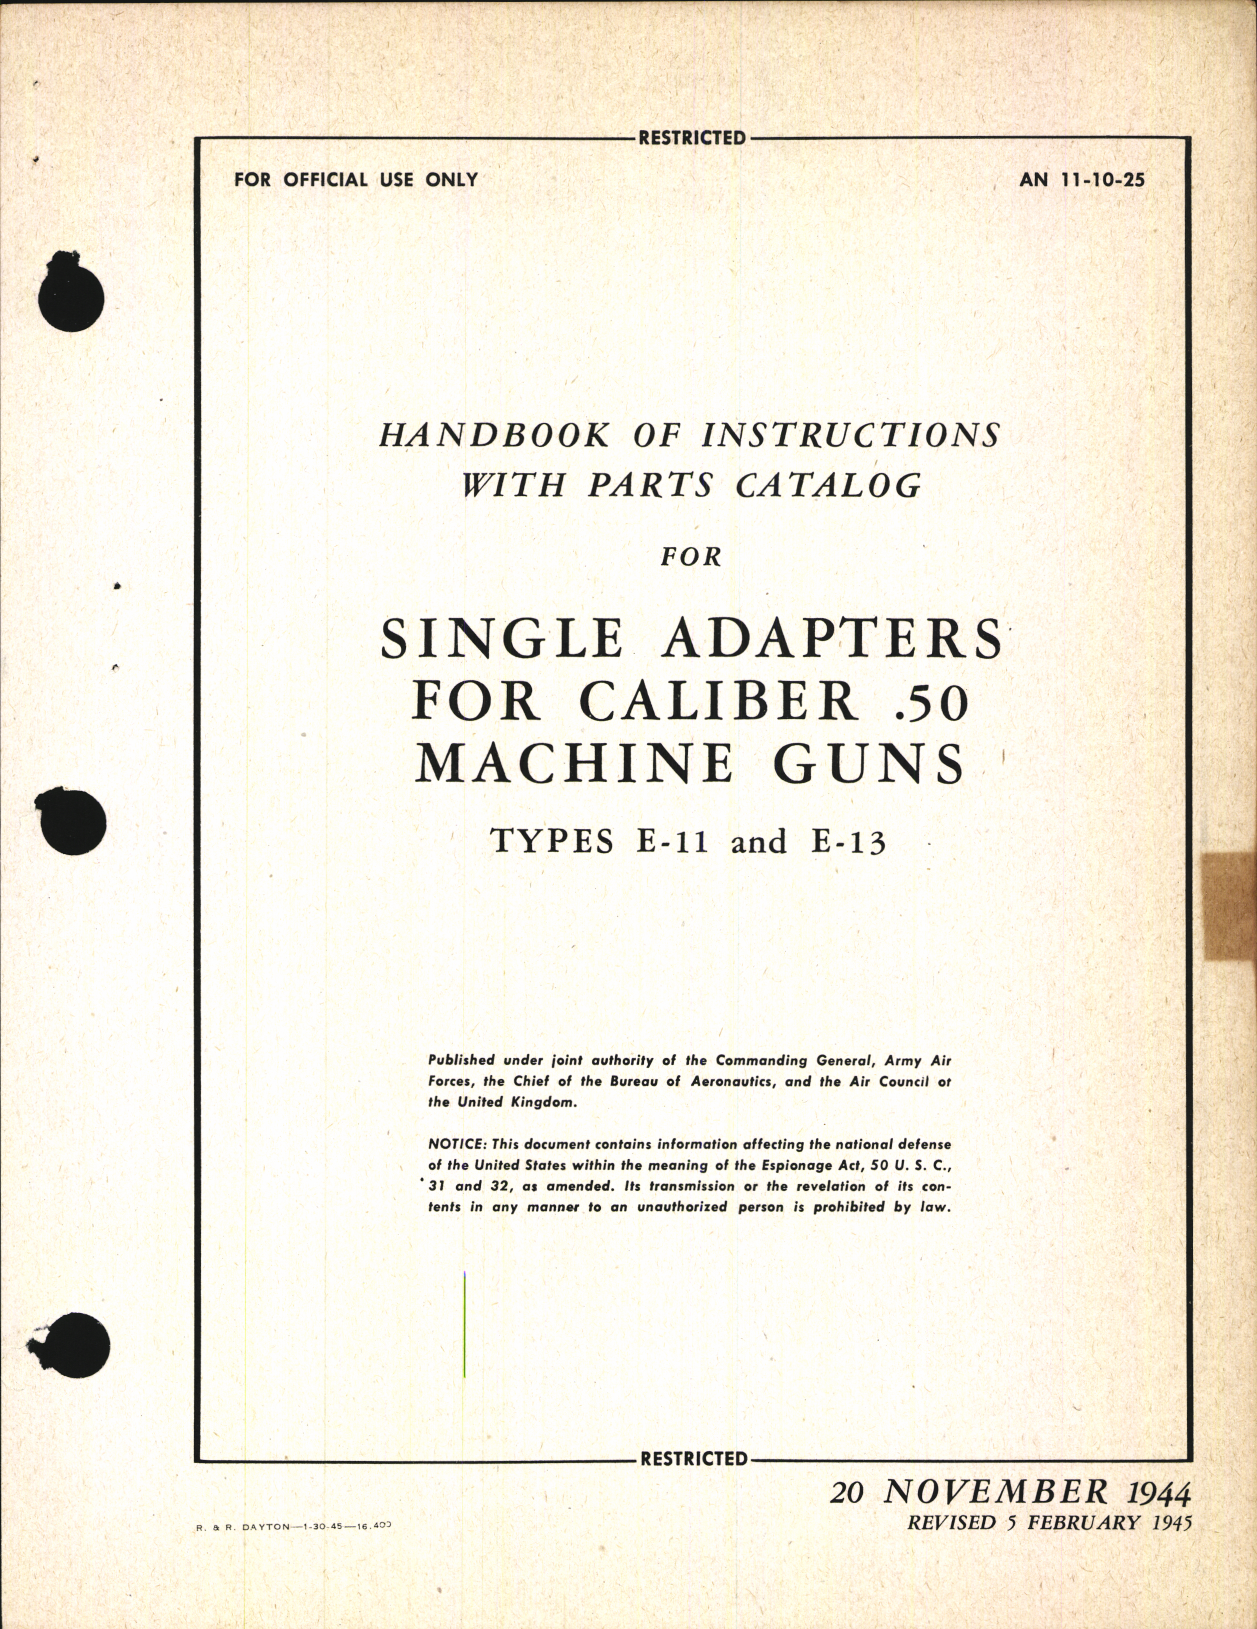 Sample page 3 from AirCorps Library document: Handbook of Instructions with Parts Catalog for Single Adapters for Caliber .50 Machine Guns Types E-11 and E-13